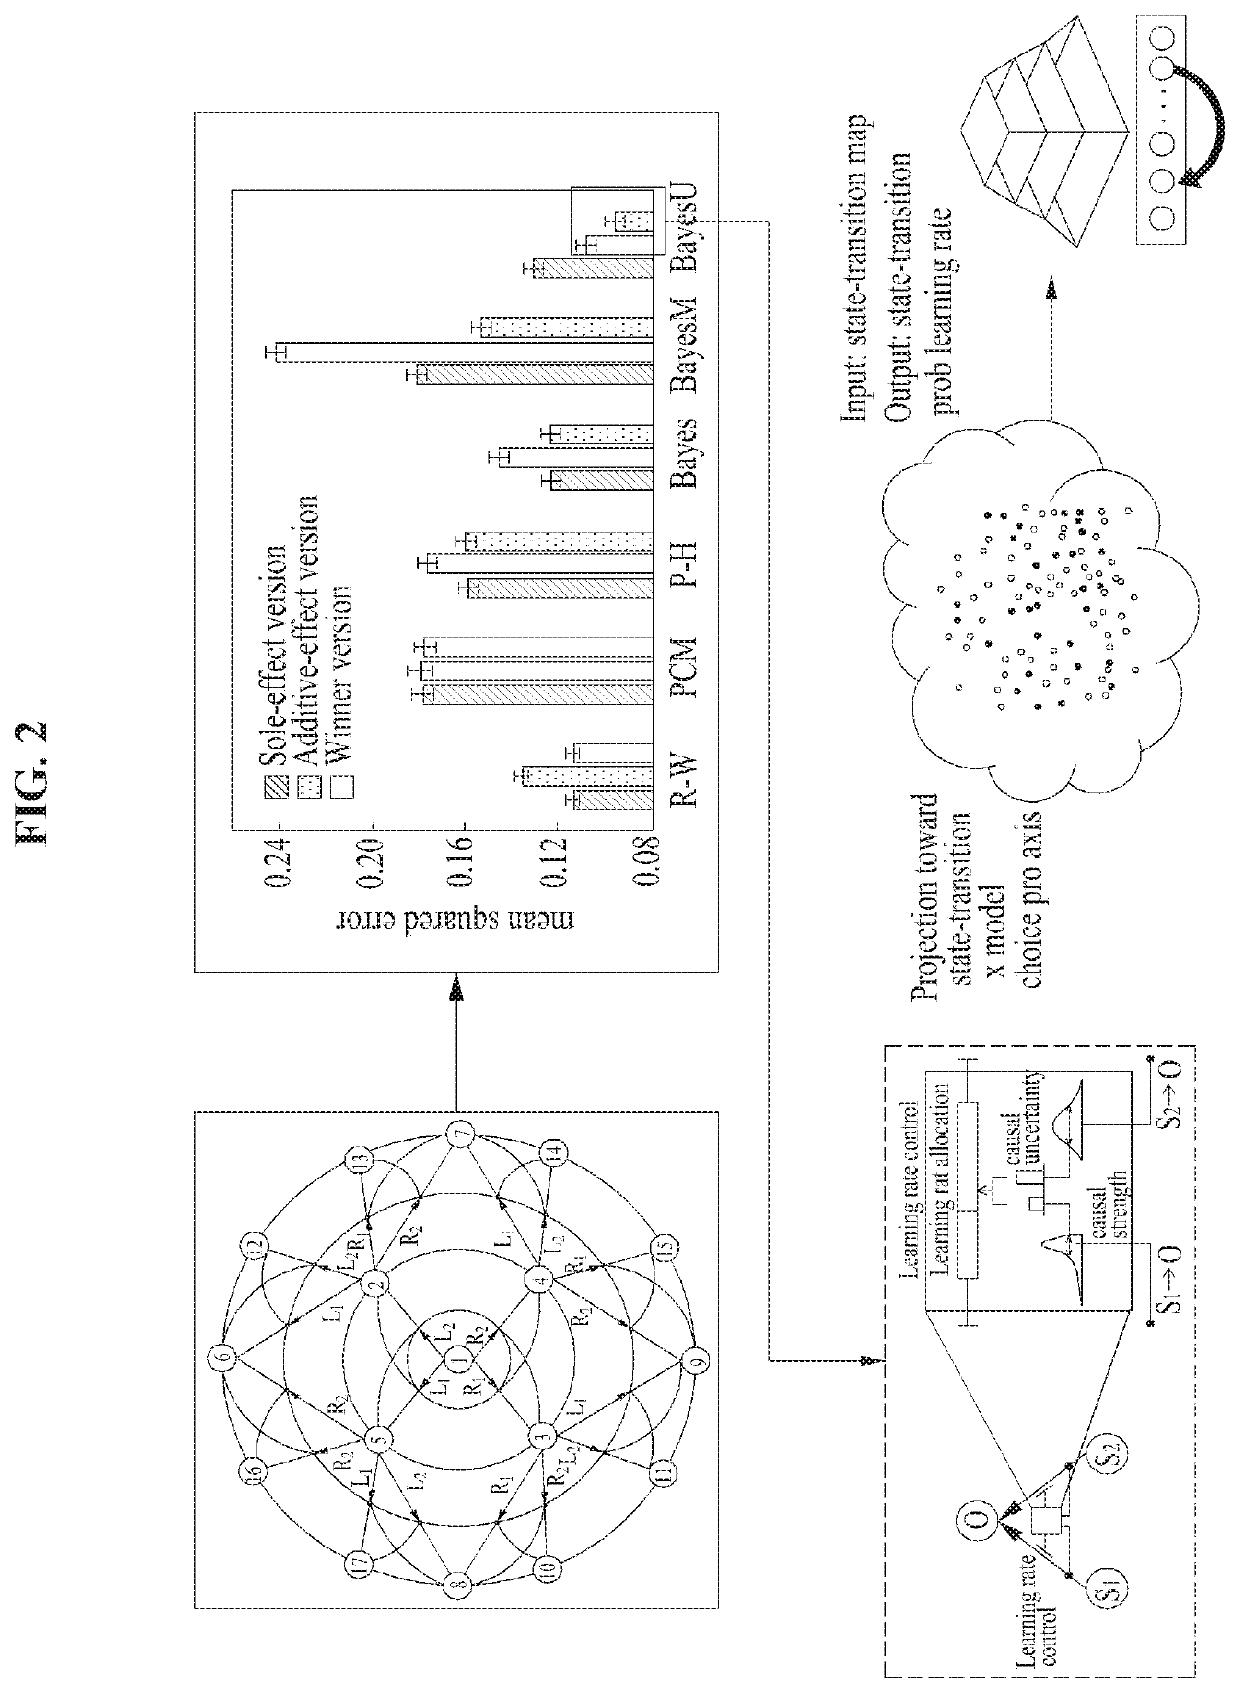 Non-invasive control apparatus and method for human learning and inference process at behavioral and neural levels based on brain-inspired artificial intelligence technique